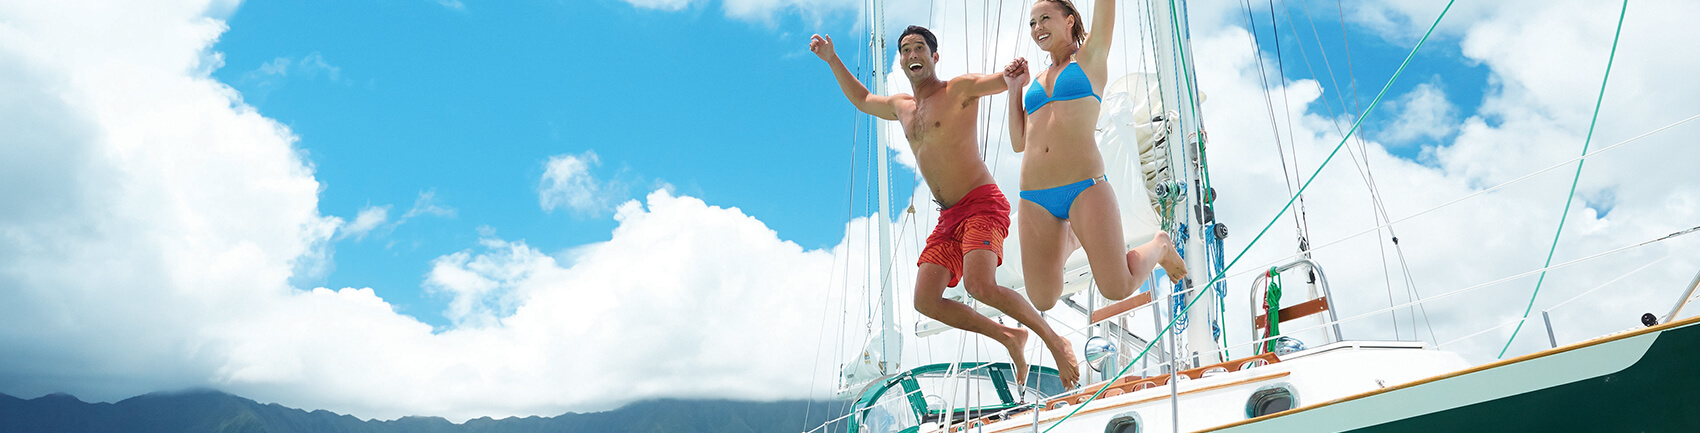 Male and female holding hands jumping into the water from the side of a boat